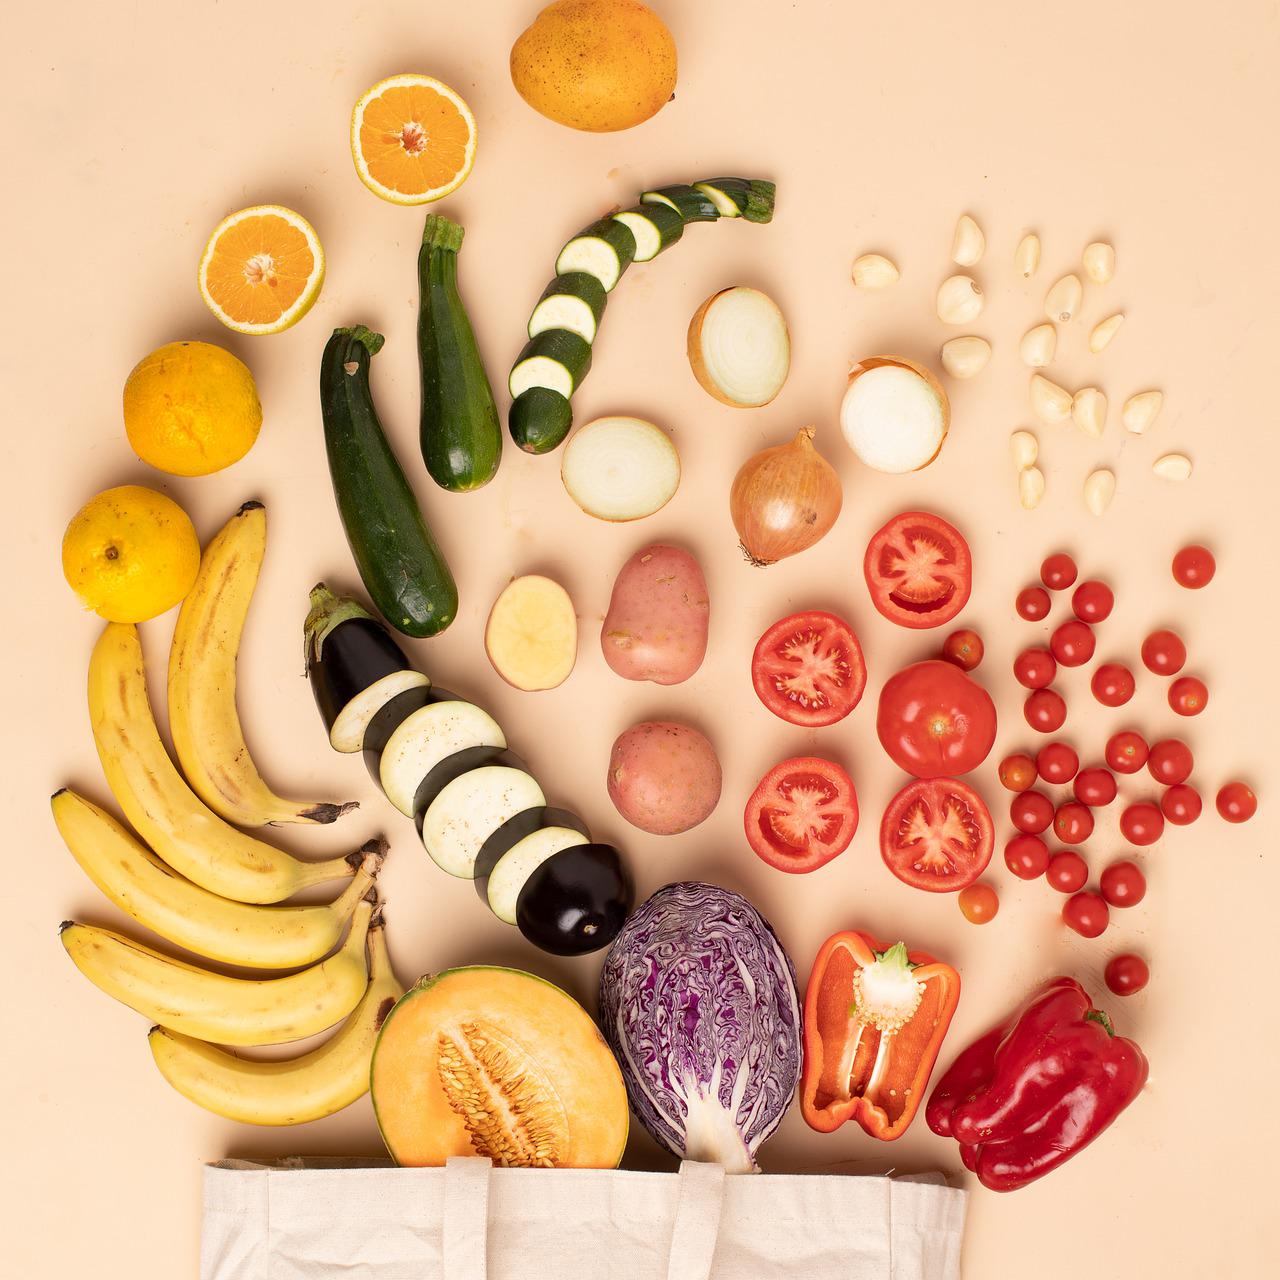 produce cut up and artfully arranged in a swirl coming out of a reusable bag